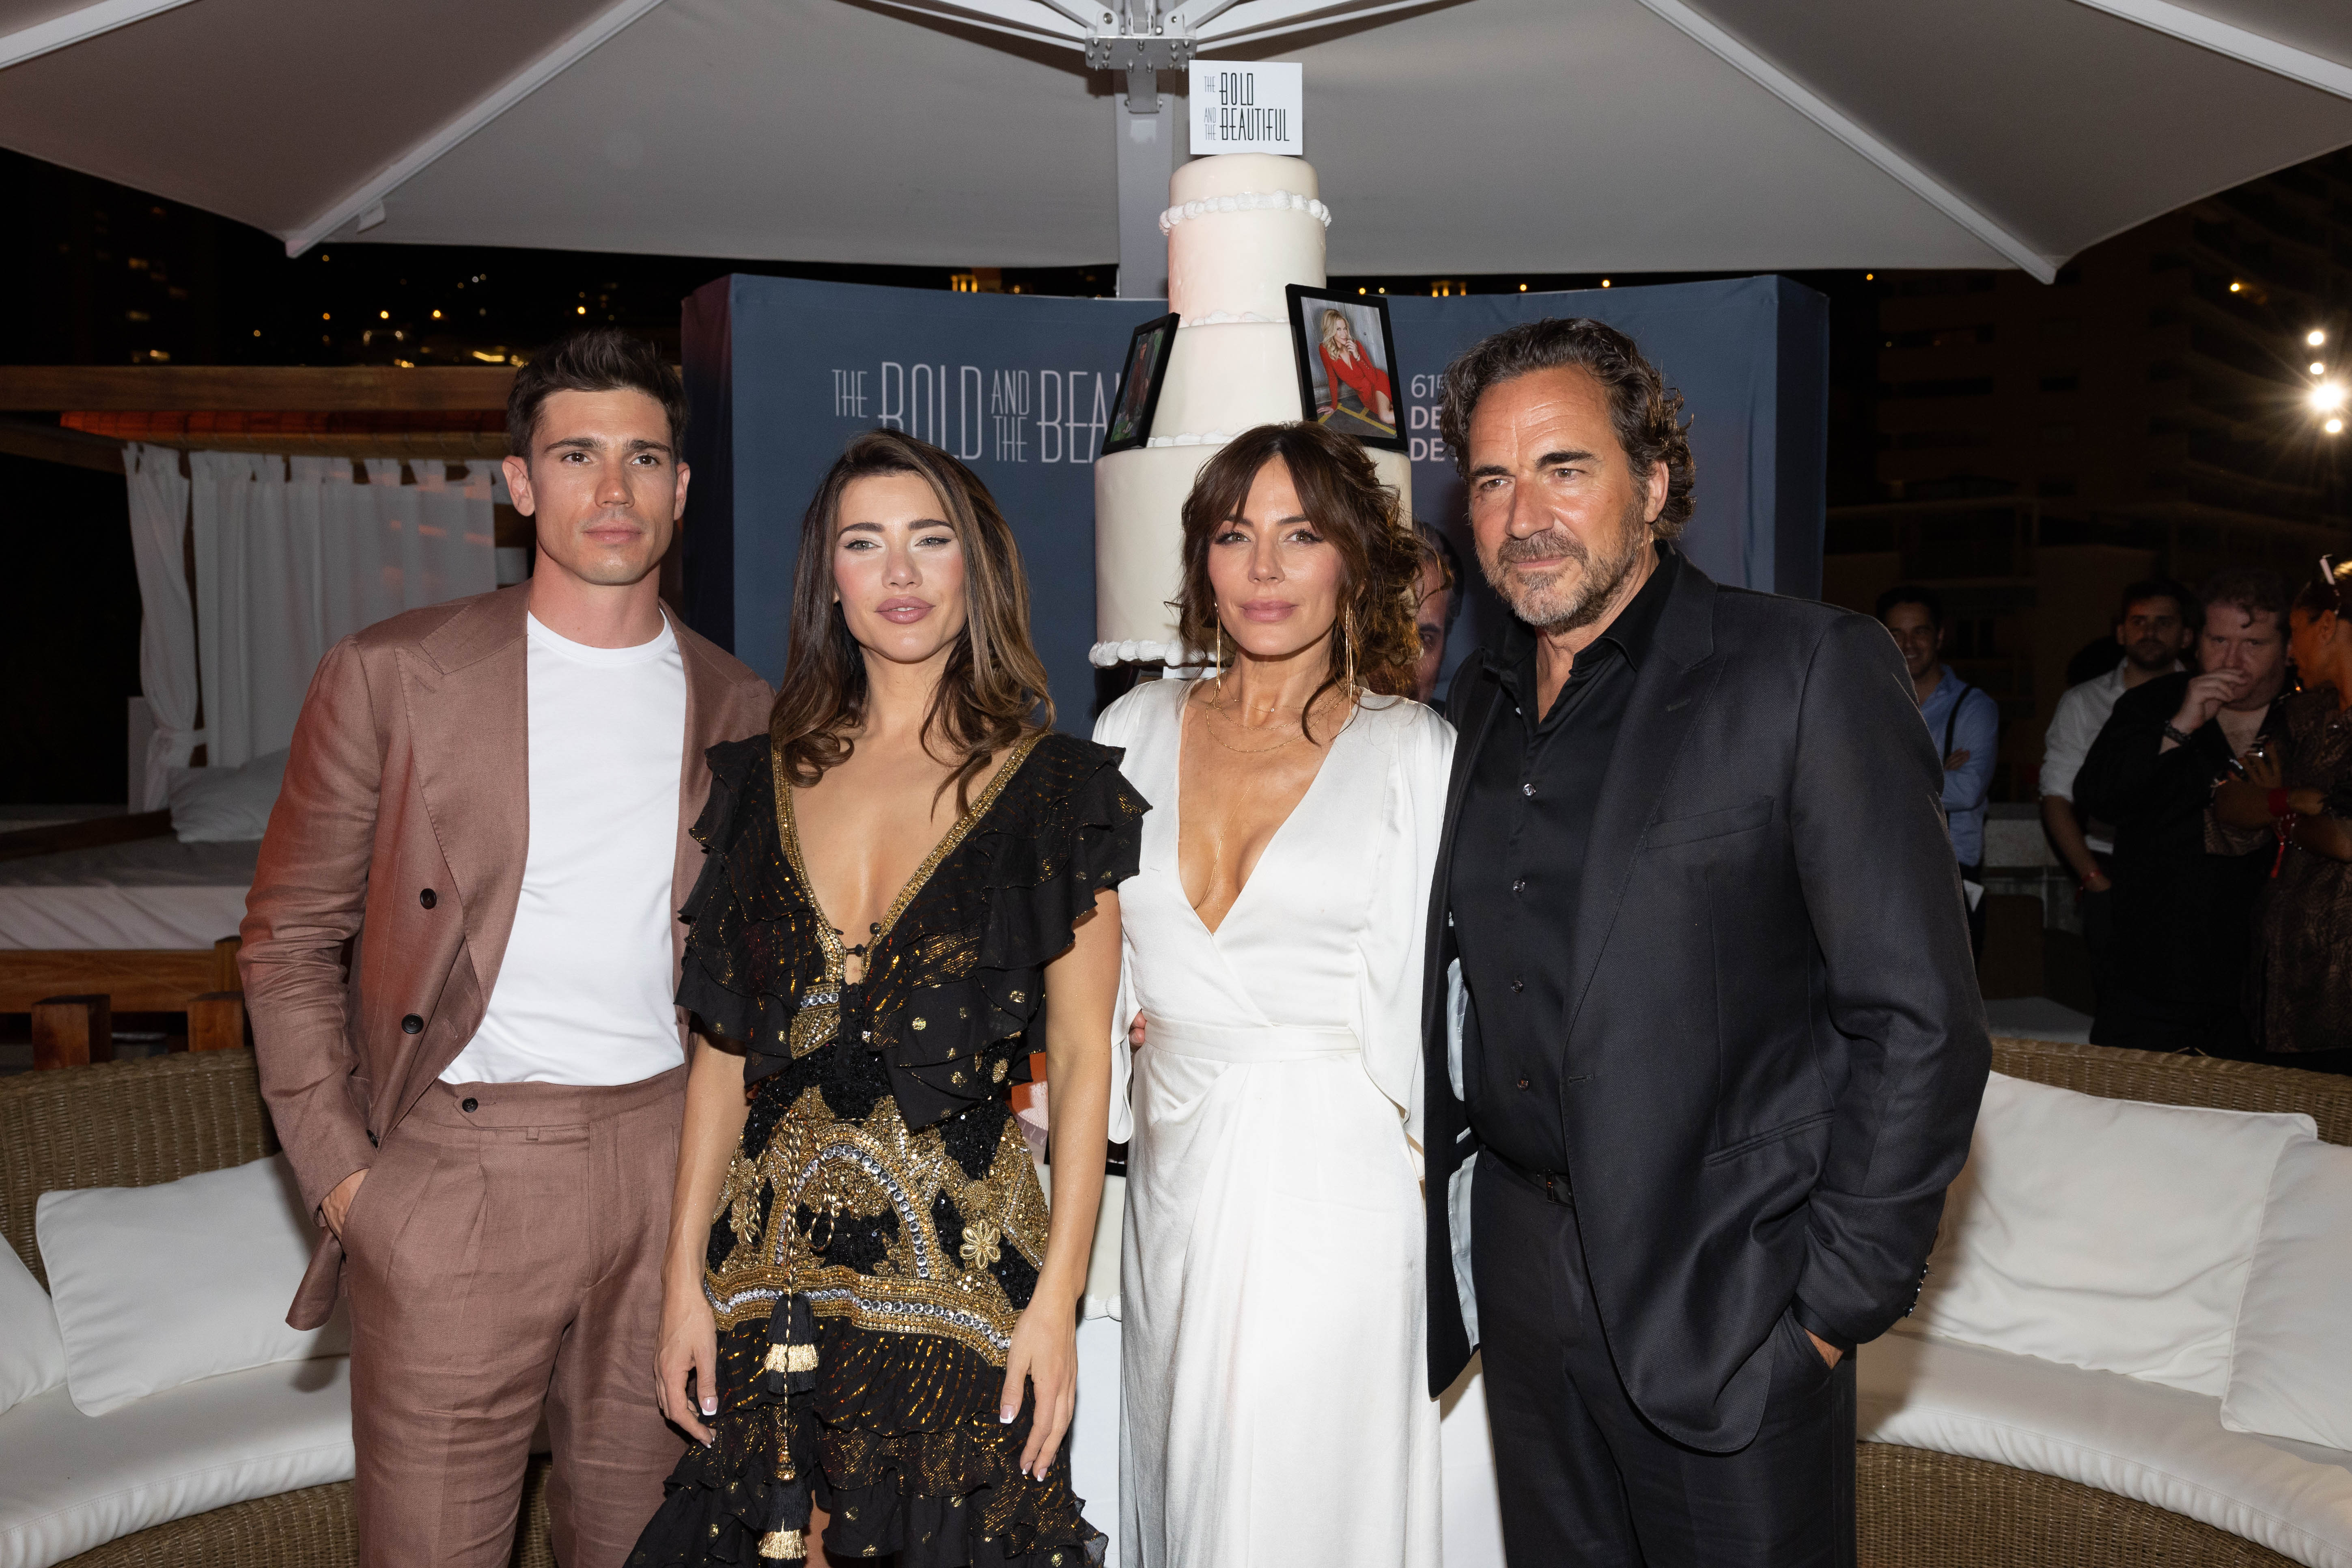 'The Bold and the Beautiful' stars Tanner Novlan, Jacqueline MacInnes Wood, Krista Allen, and Thorsten Kaye pose together for a group photo at a party.